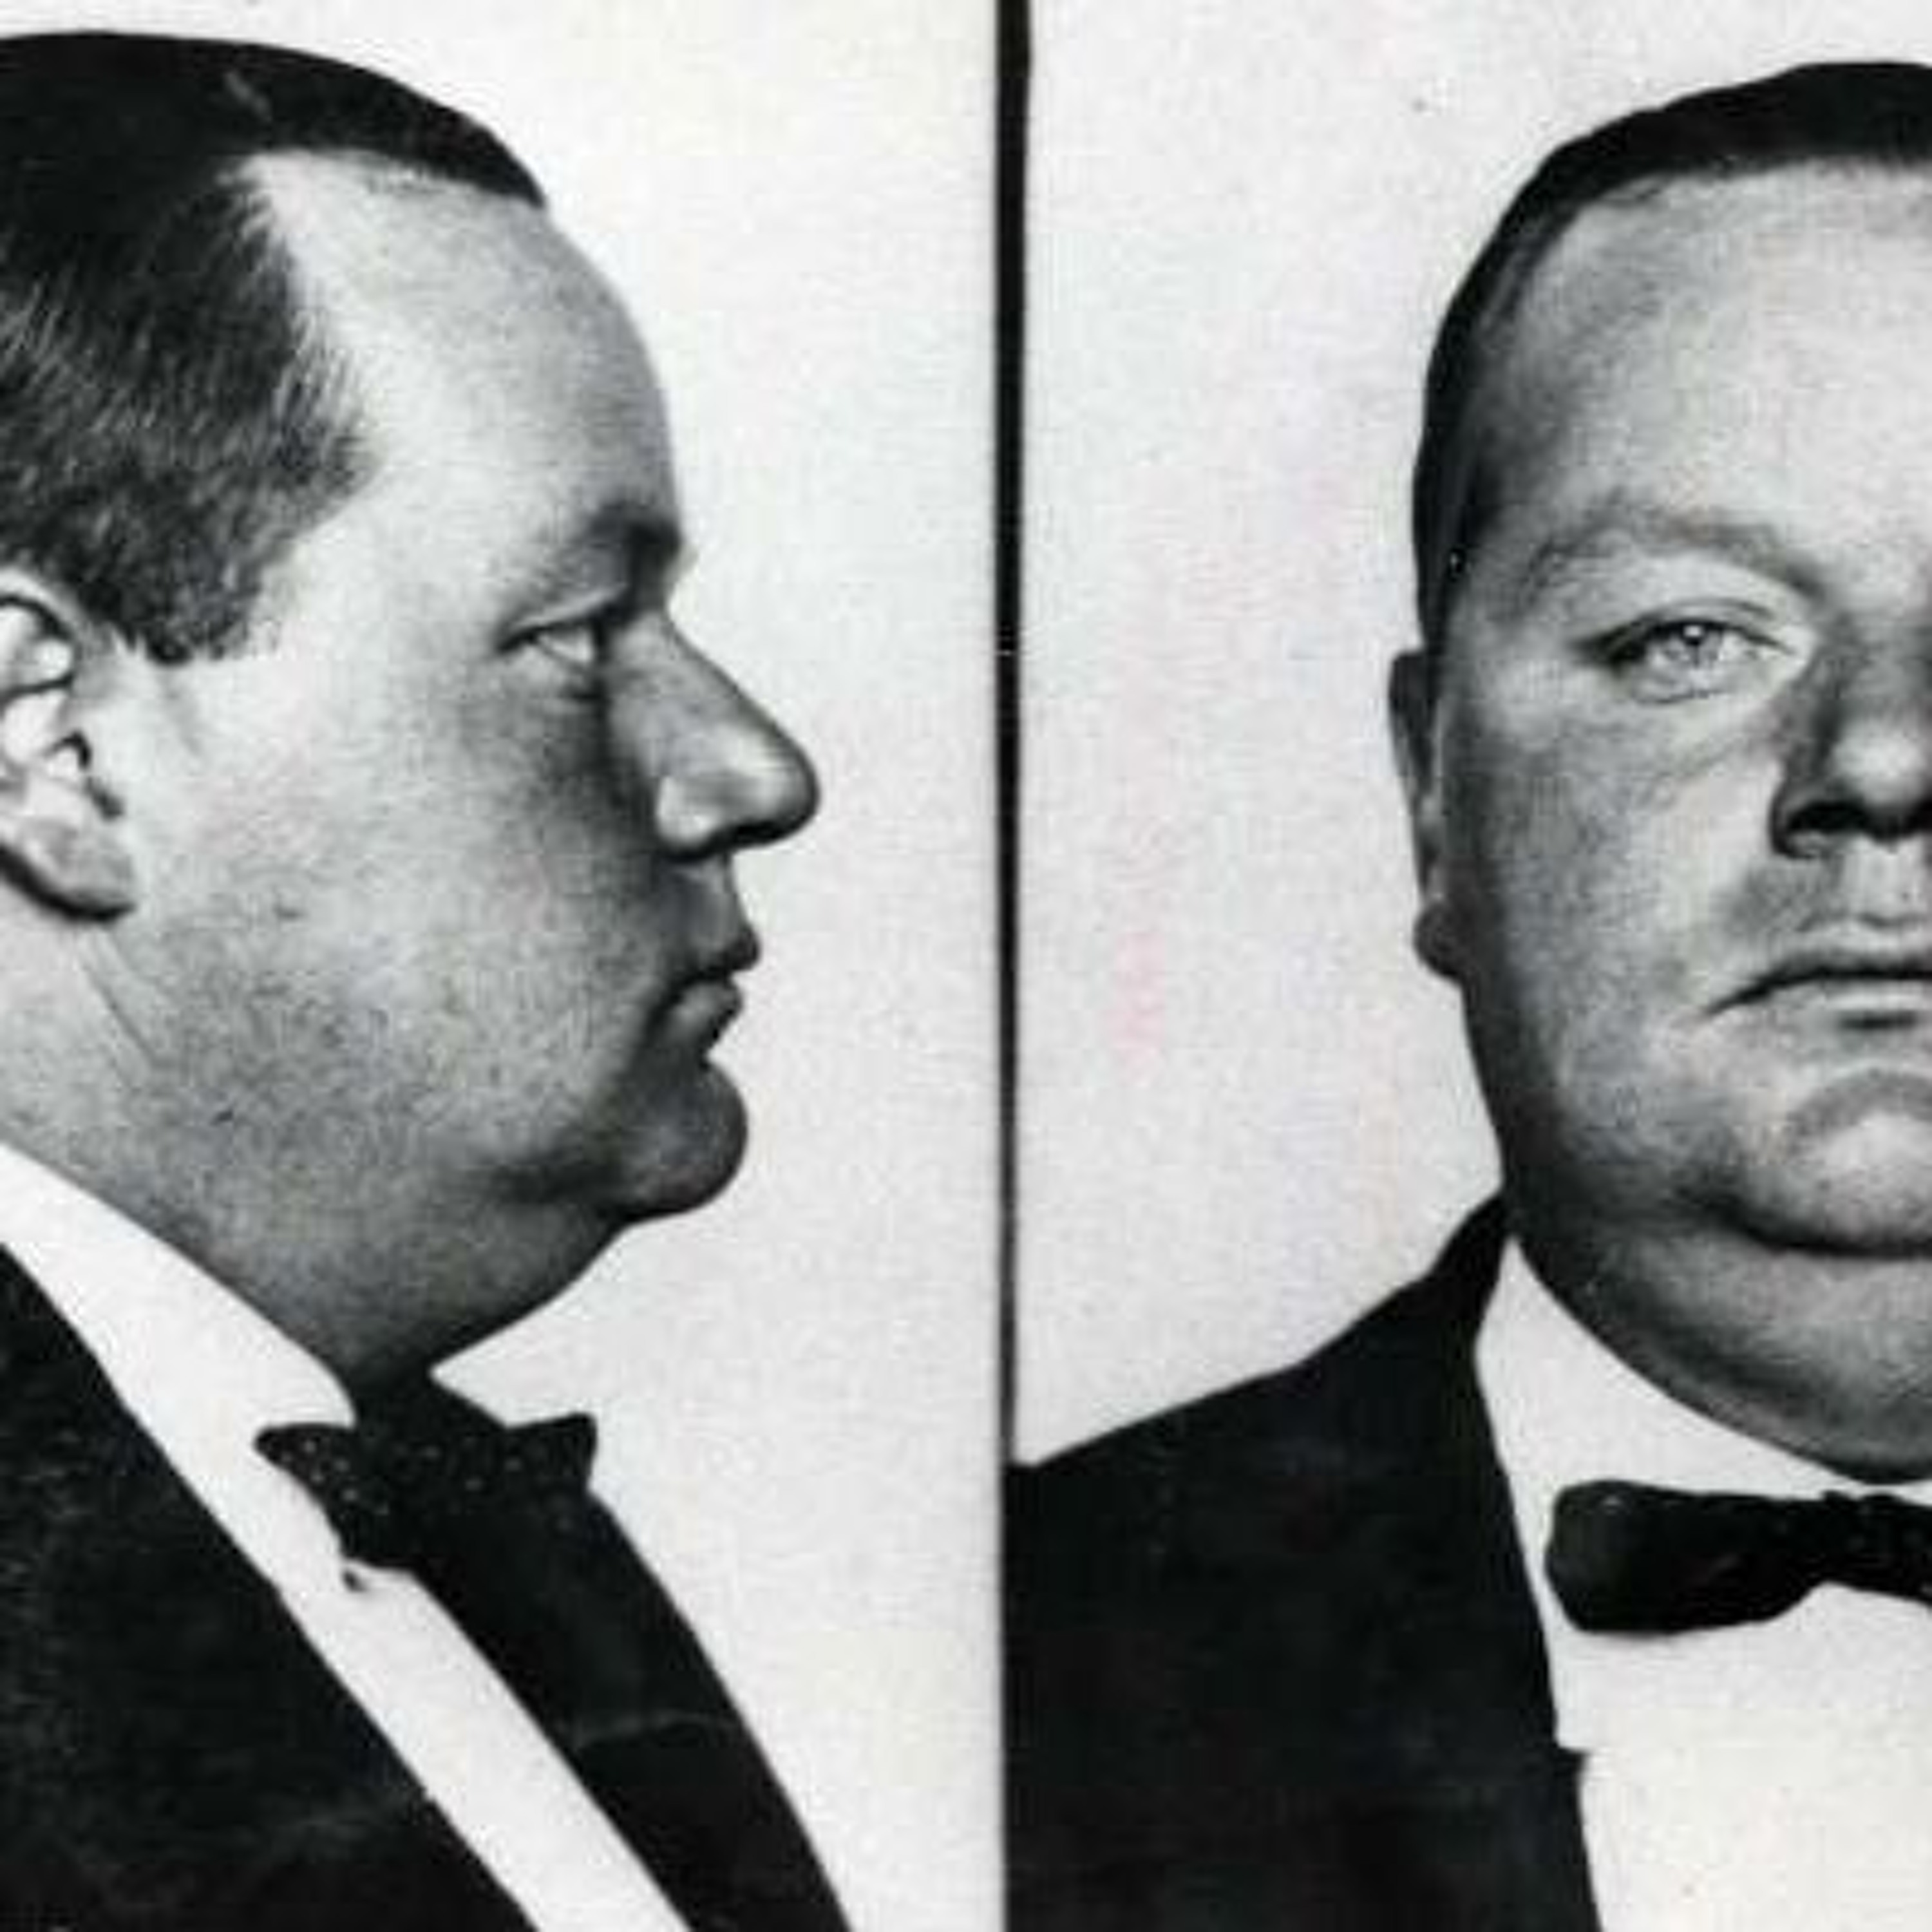 Episode 87: Roscoe ”Fatty” Arbuckle, Part Two - The Fall